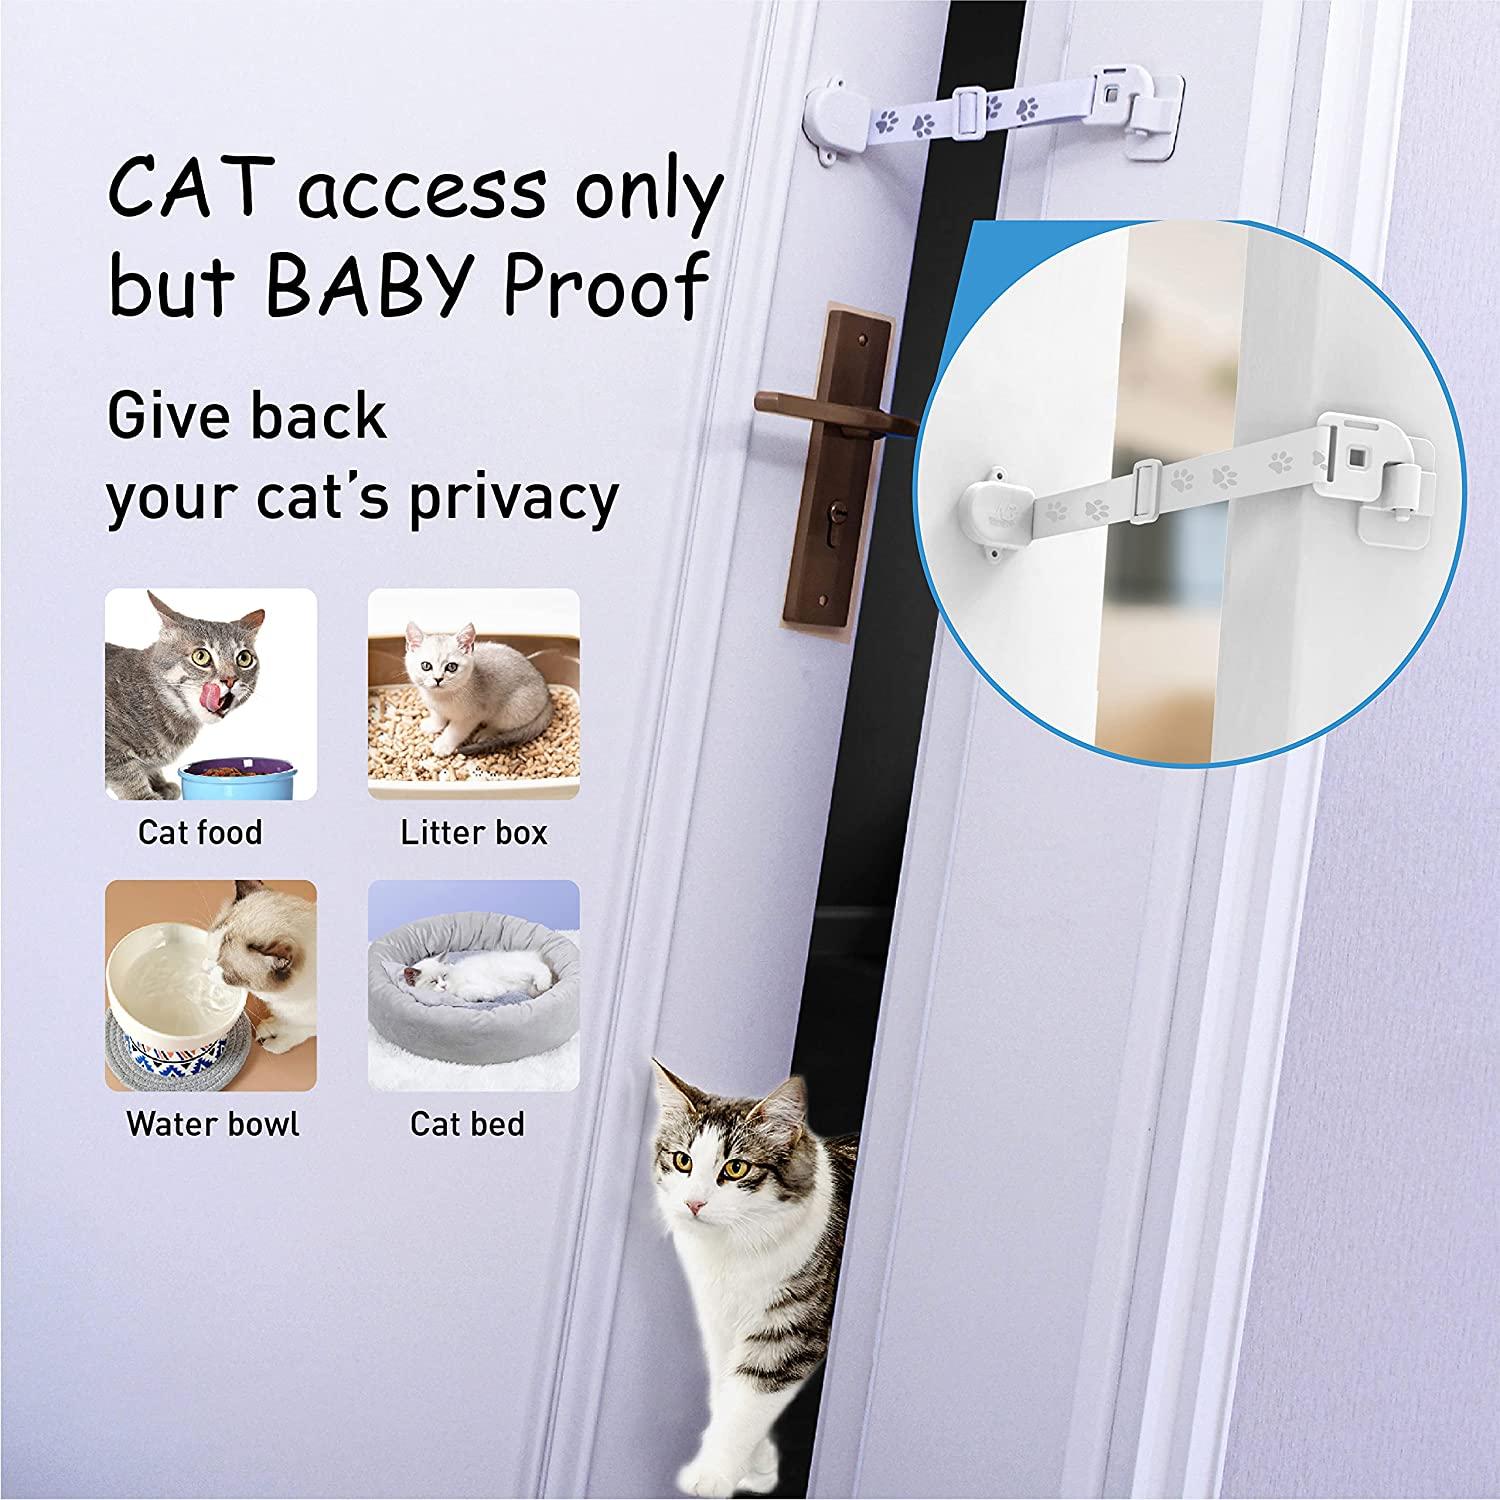 Neobay Child Proof Door Lock with Adjustable Door Strap and Latch. No Need  for Interior Cat Door. Keep Toddler Out of Room with Litter Box While Let  Cat in Easily. Basic